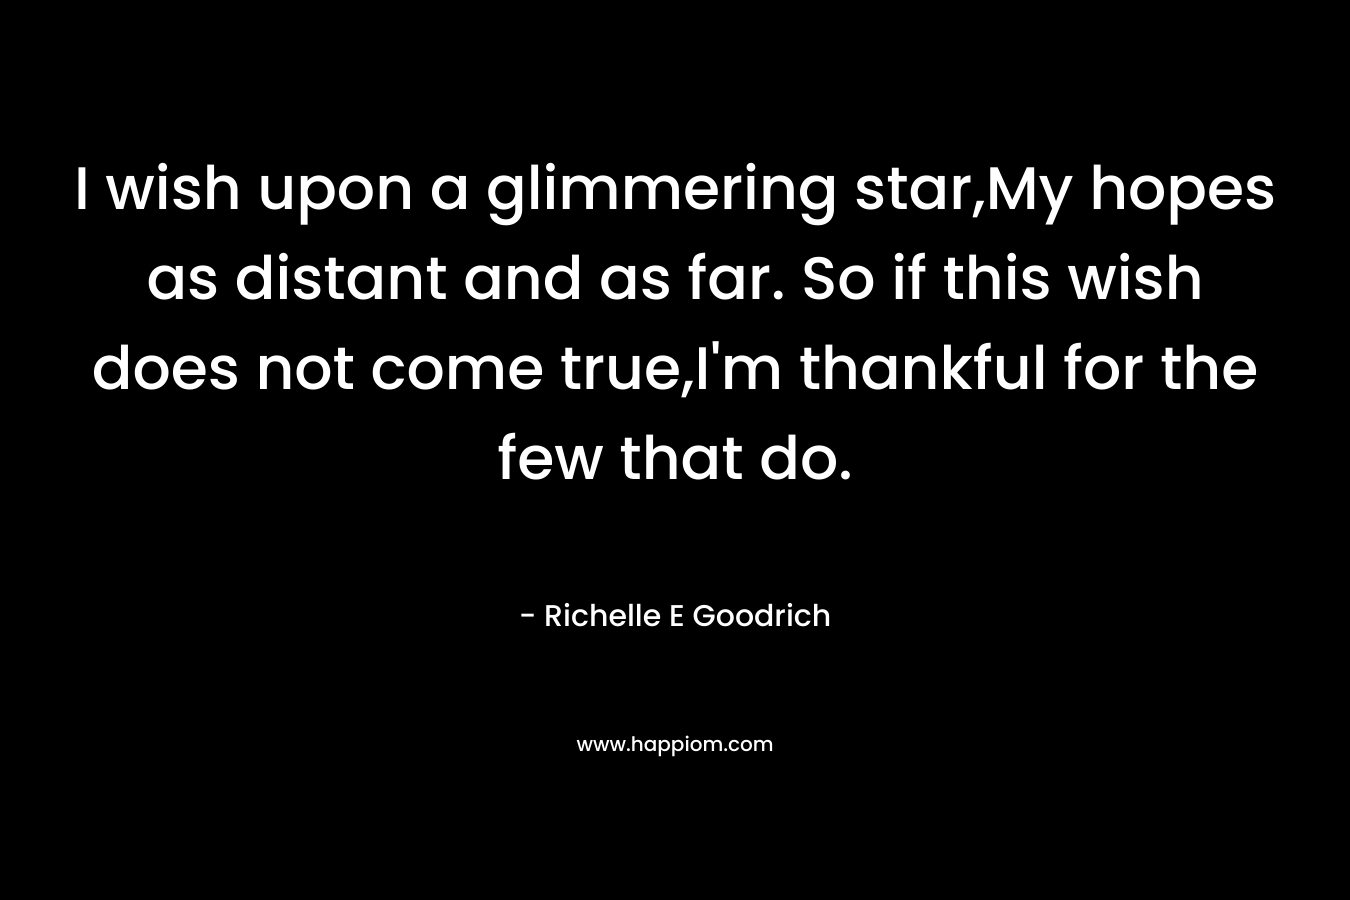 I wish upon a glimmering star,My hopes as distant and as far. So if this wish does not come true,I’m thankful for the few that do. – Richelle E Goodrich